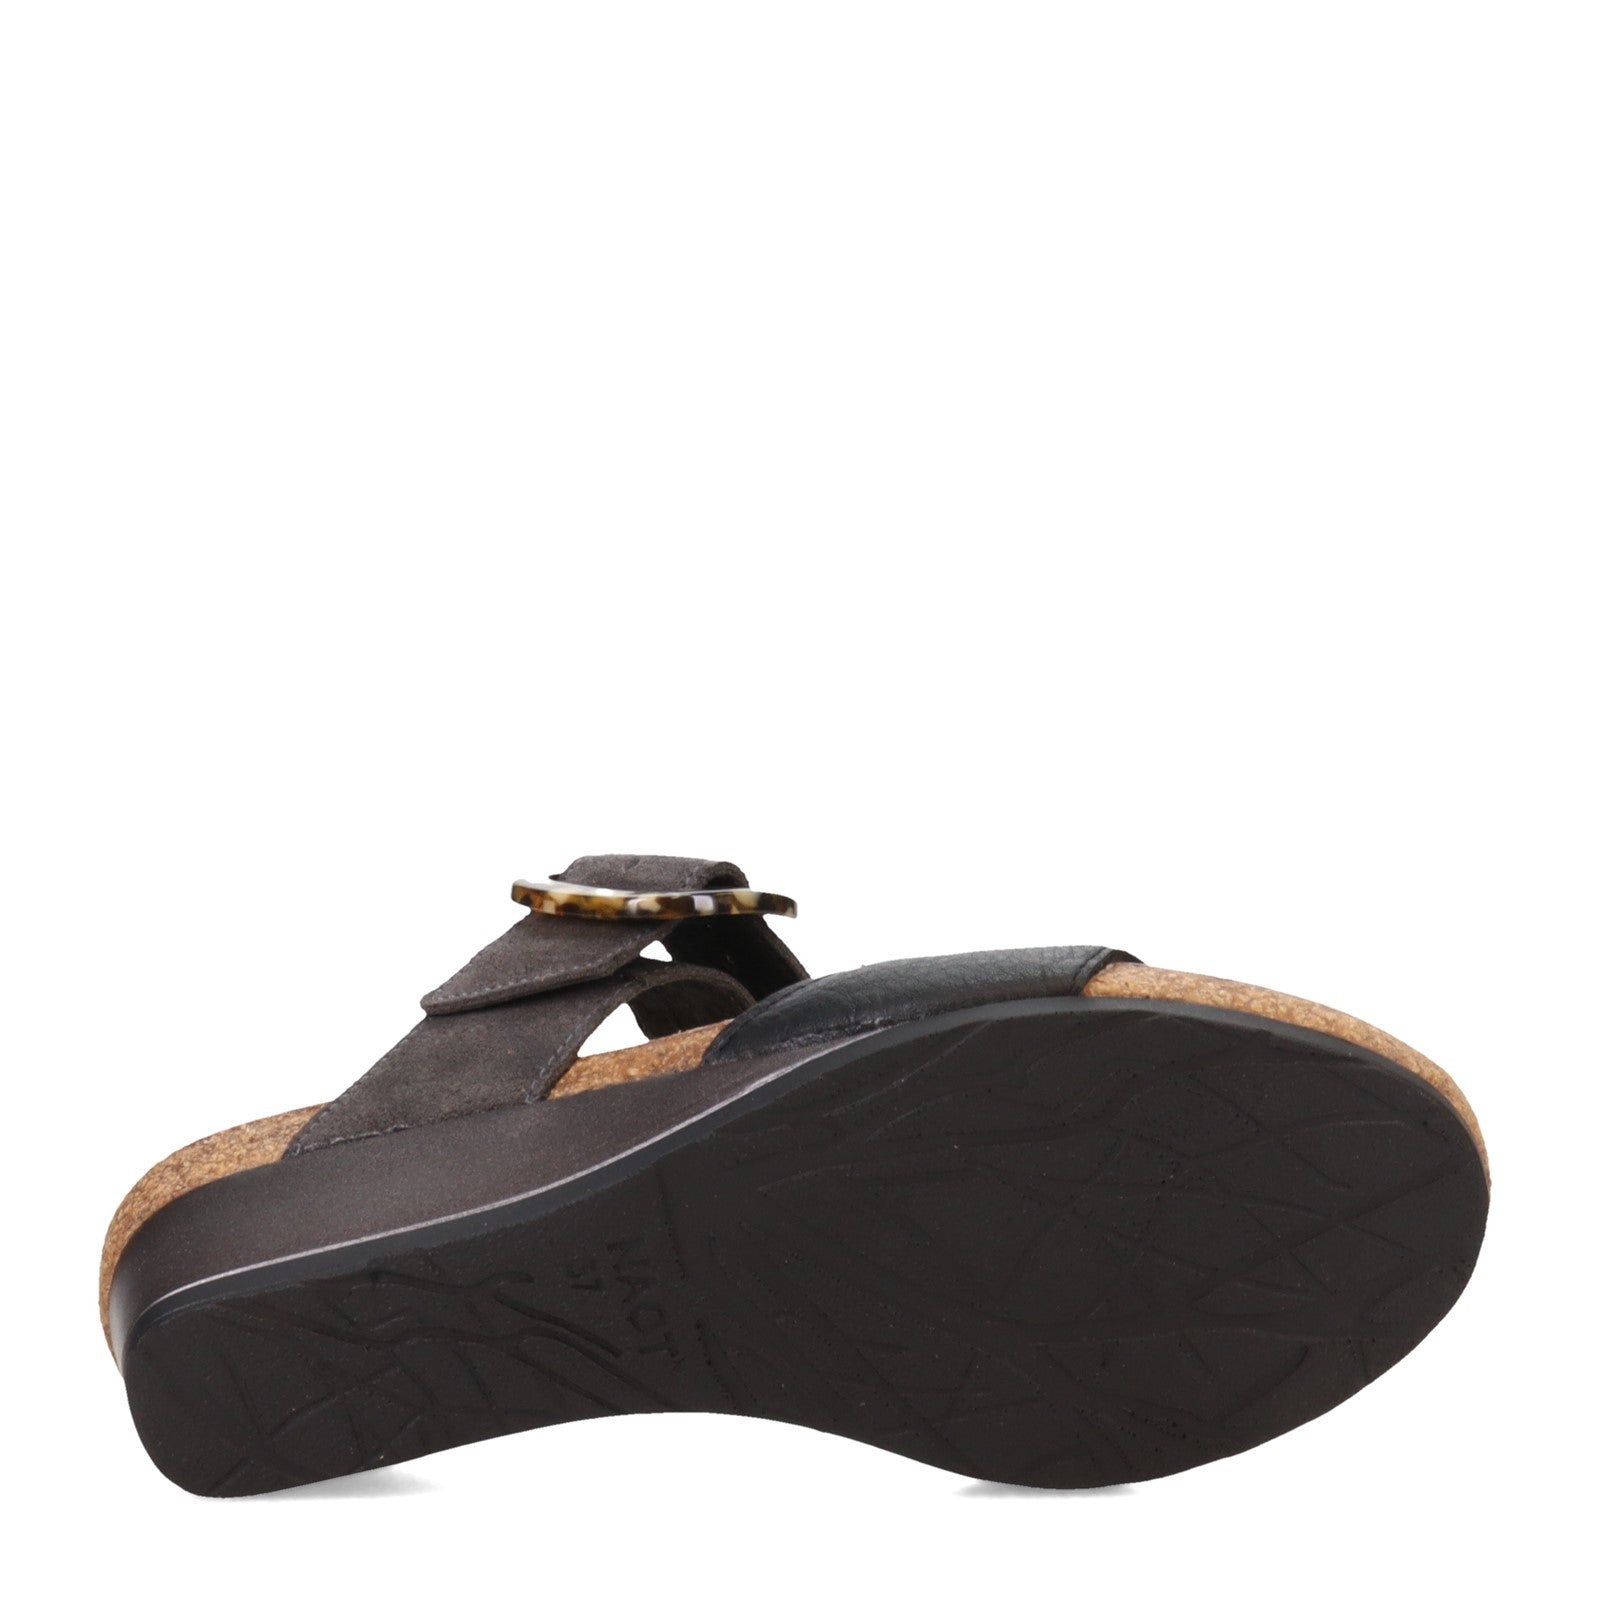 Kingdom | Leather/Suede | Soft Black/Oily Midnight - Sandals - Naot